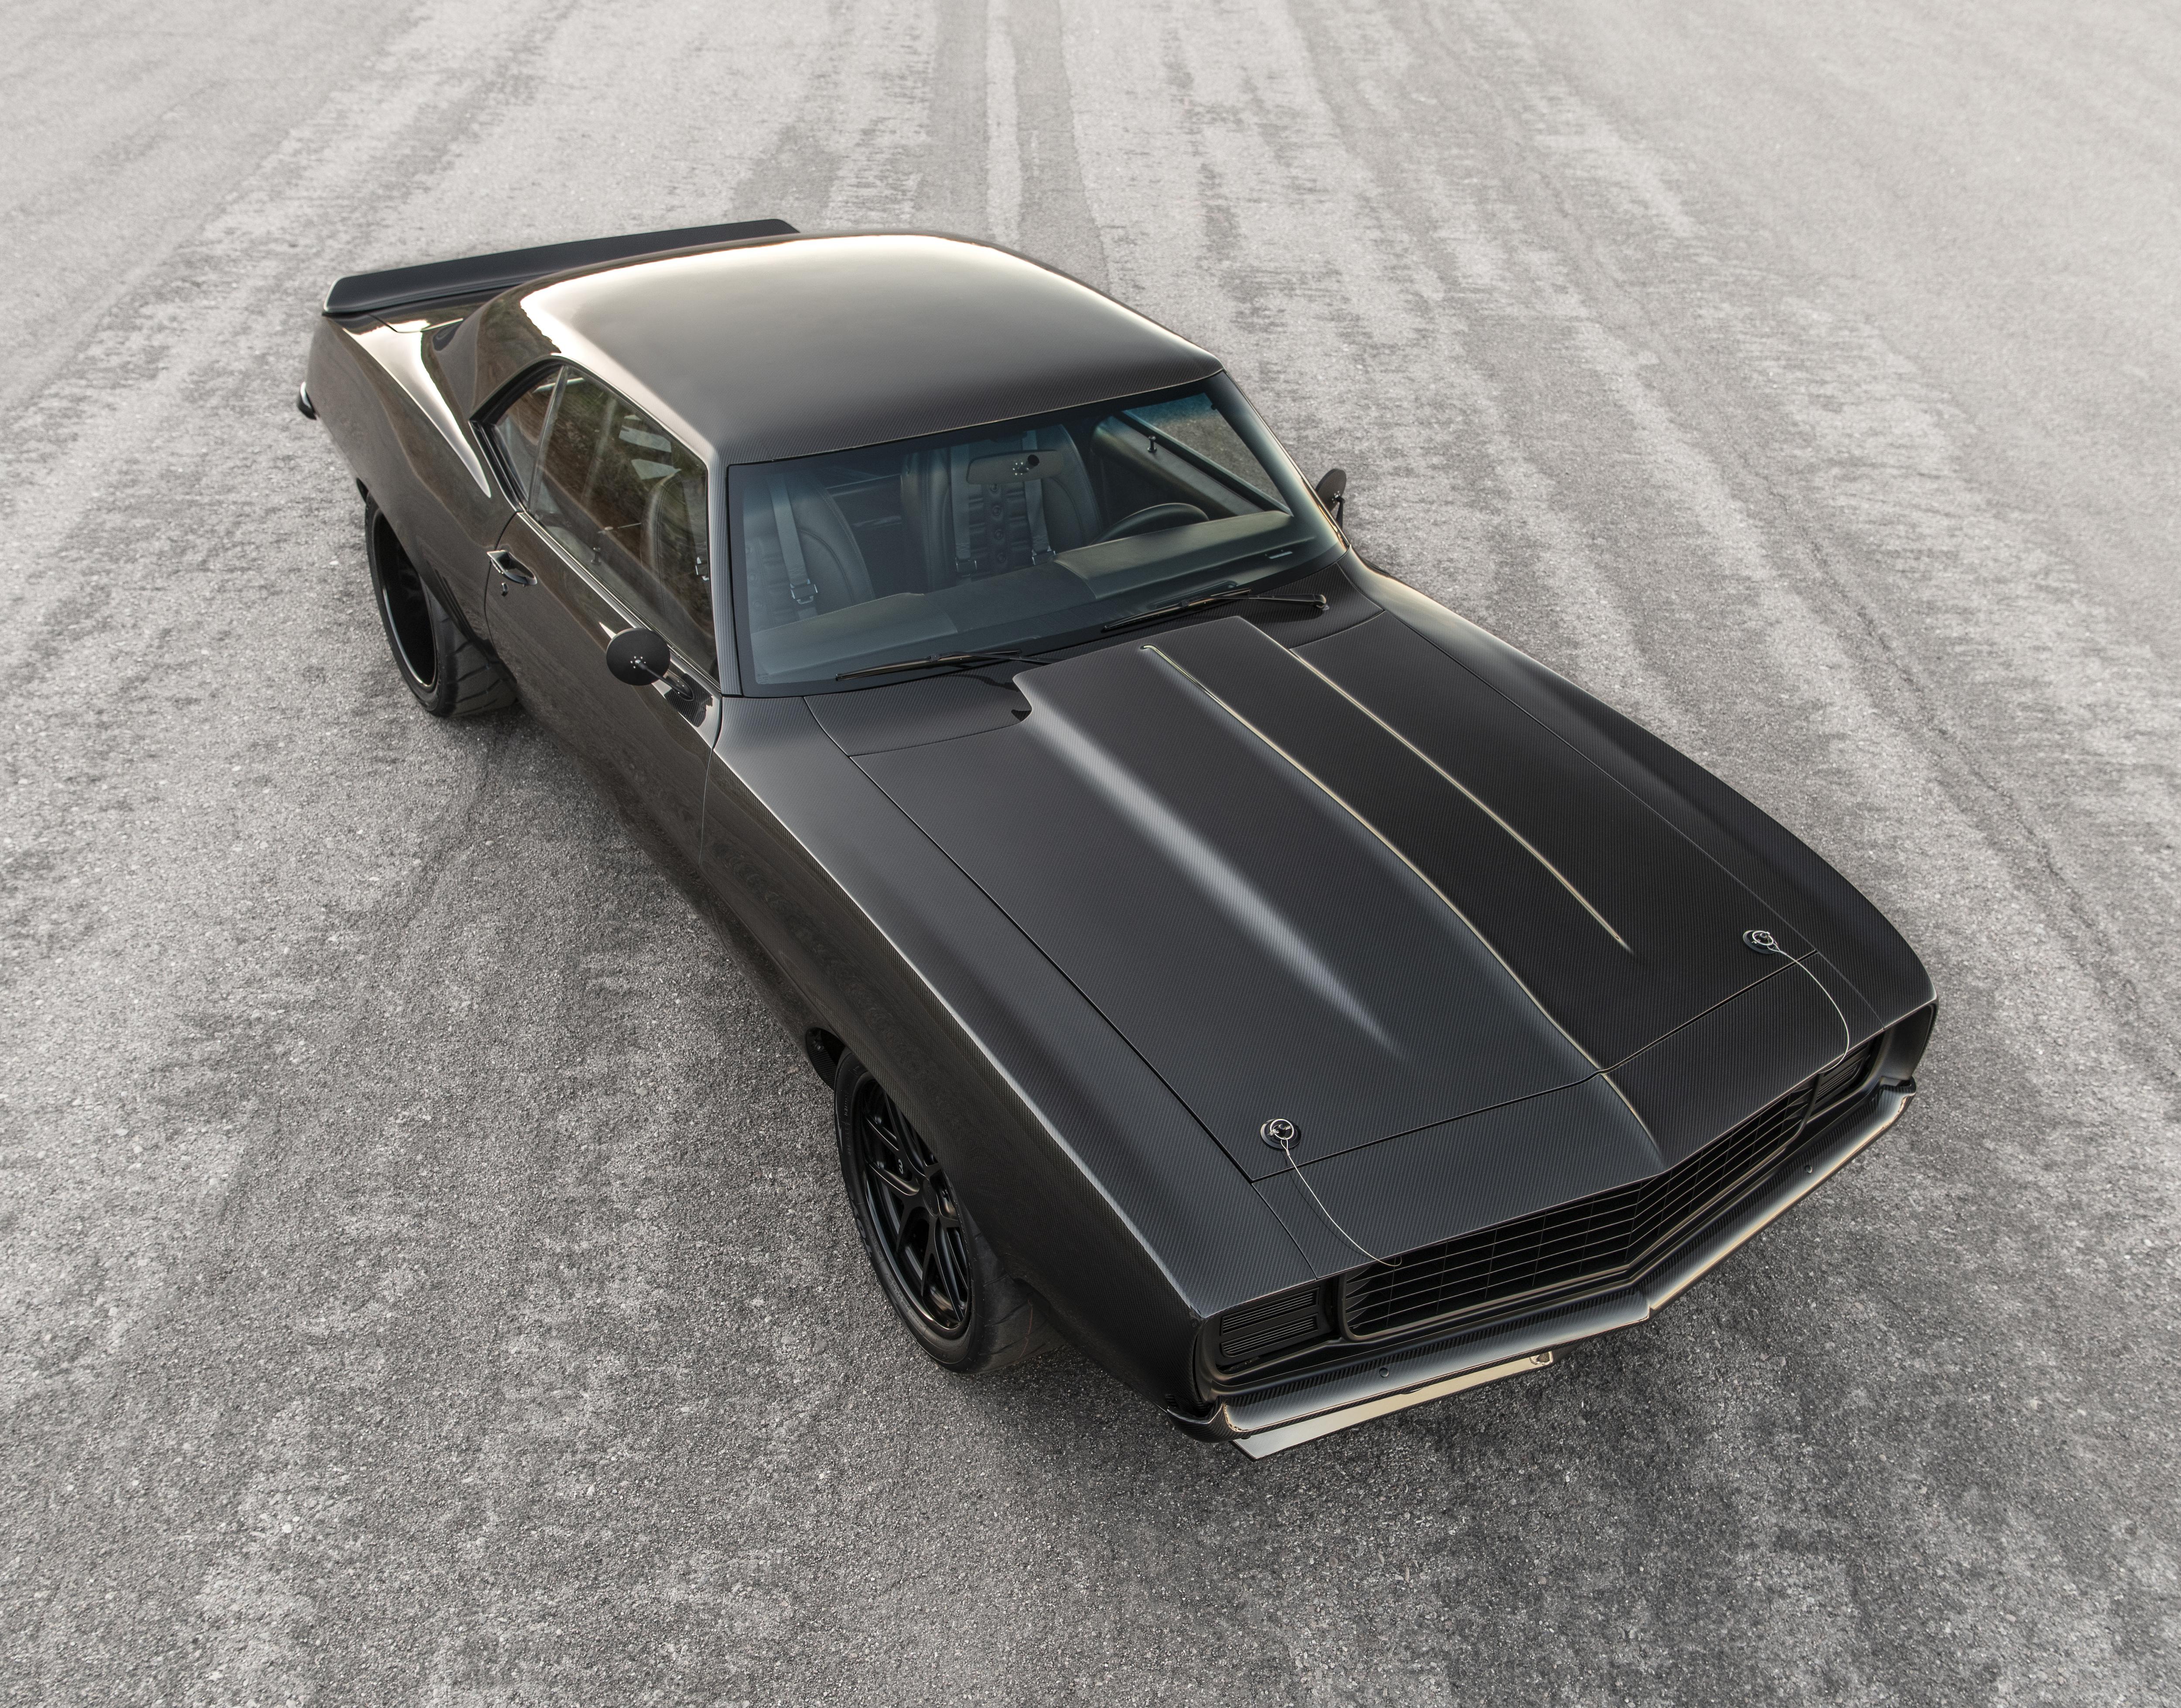 Carbon-fiber 1970 Charger and 1969 Camaro just the start of a wave of composite-bodied classic muscle cars